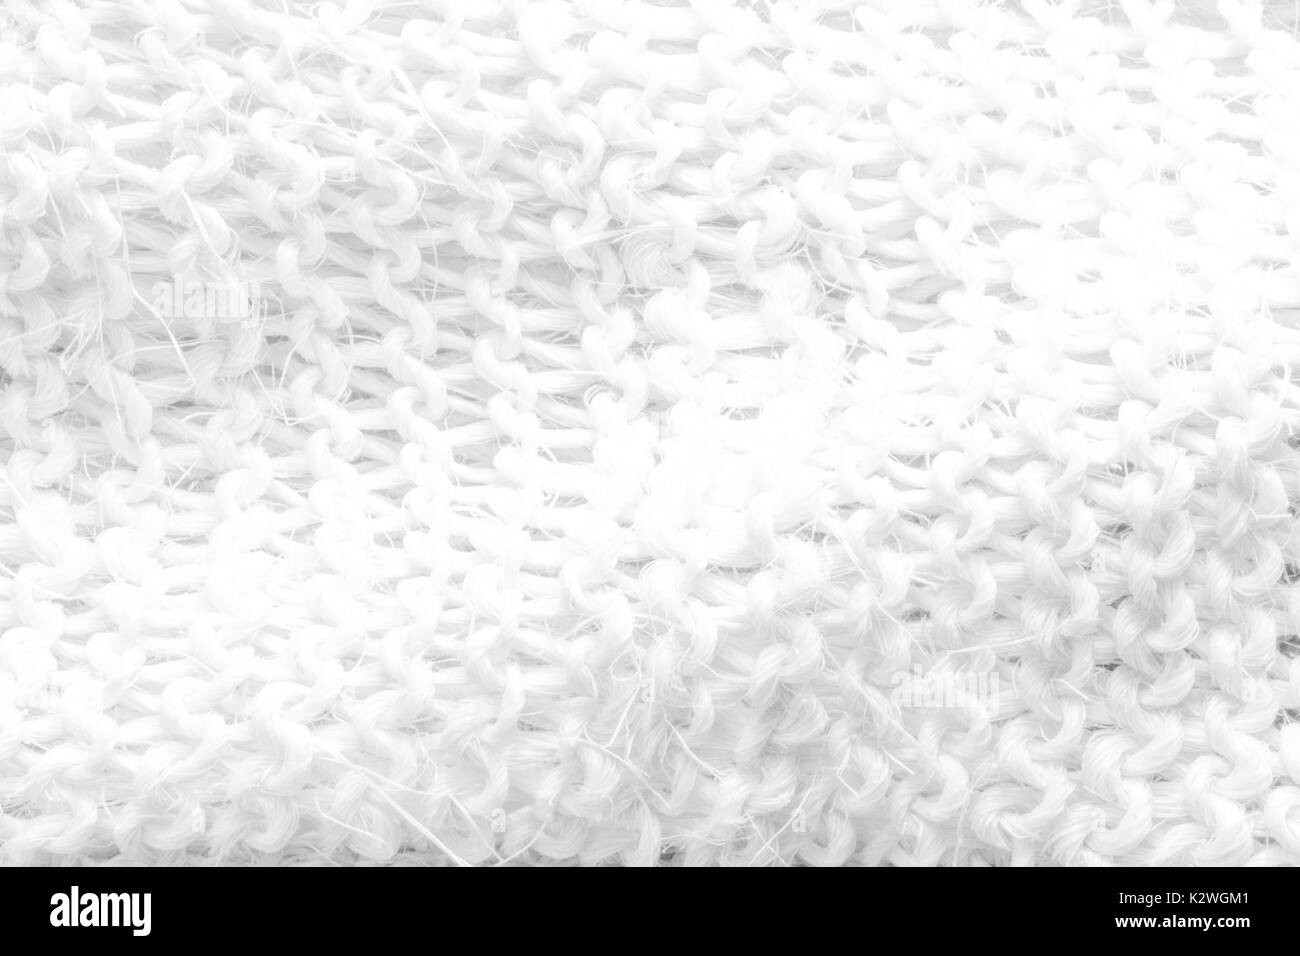 White wisp and body scrub texture with natural patterns can be used as background. Stock Photo